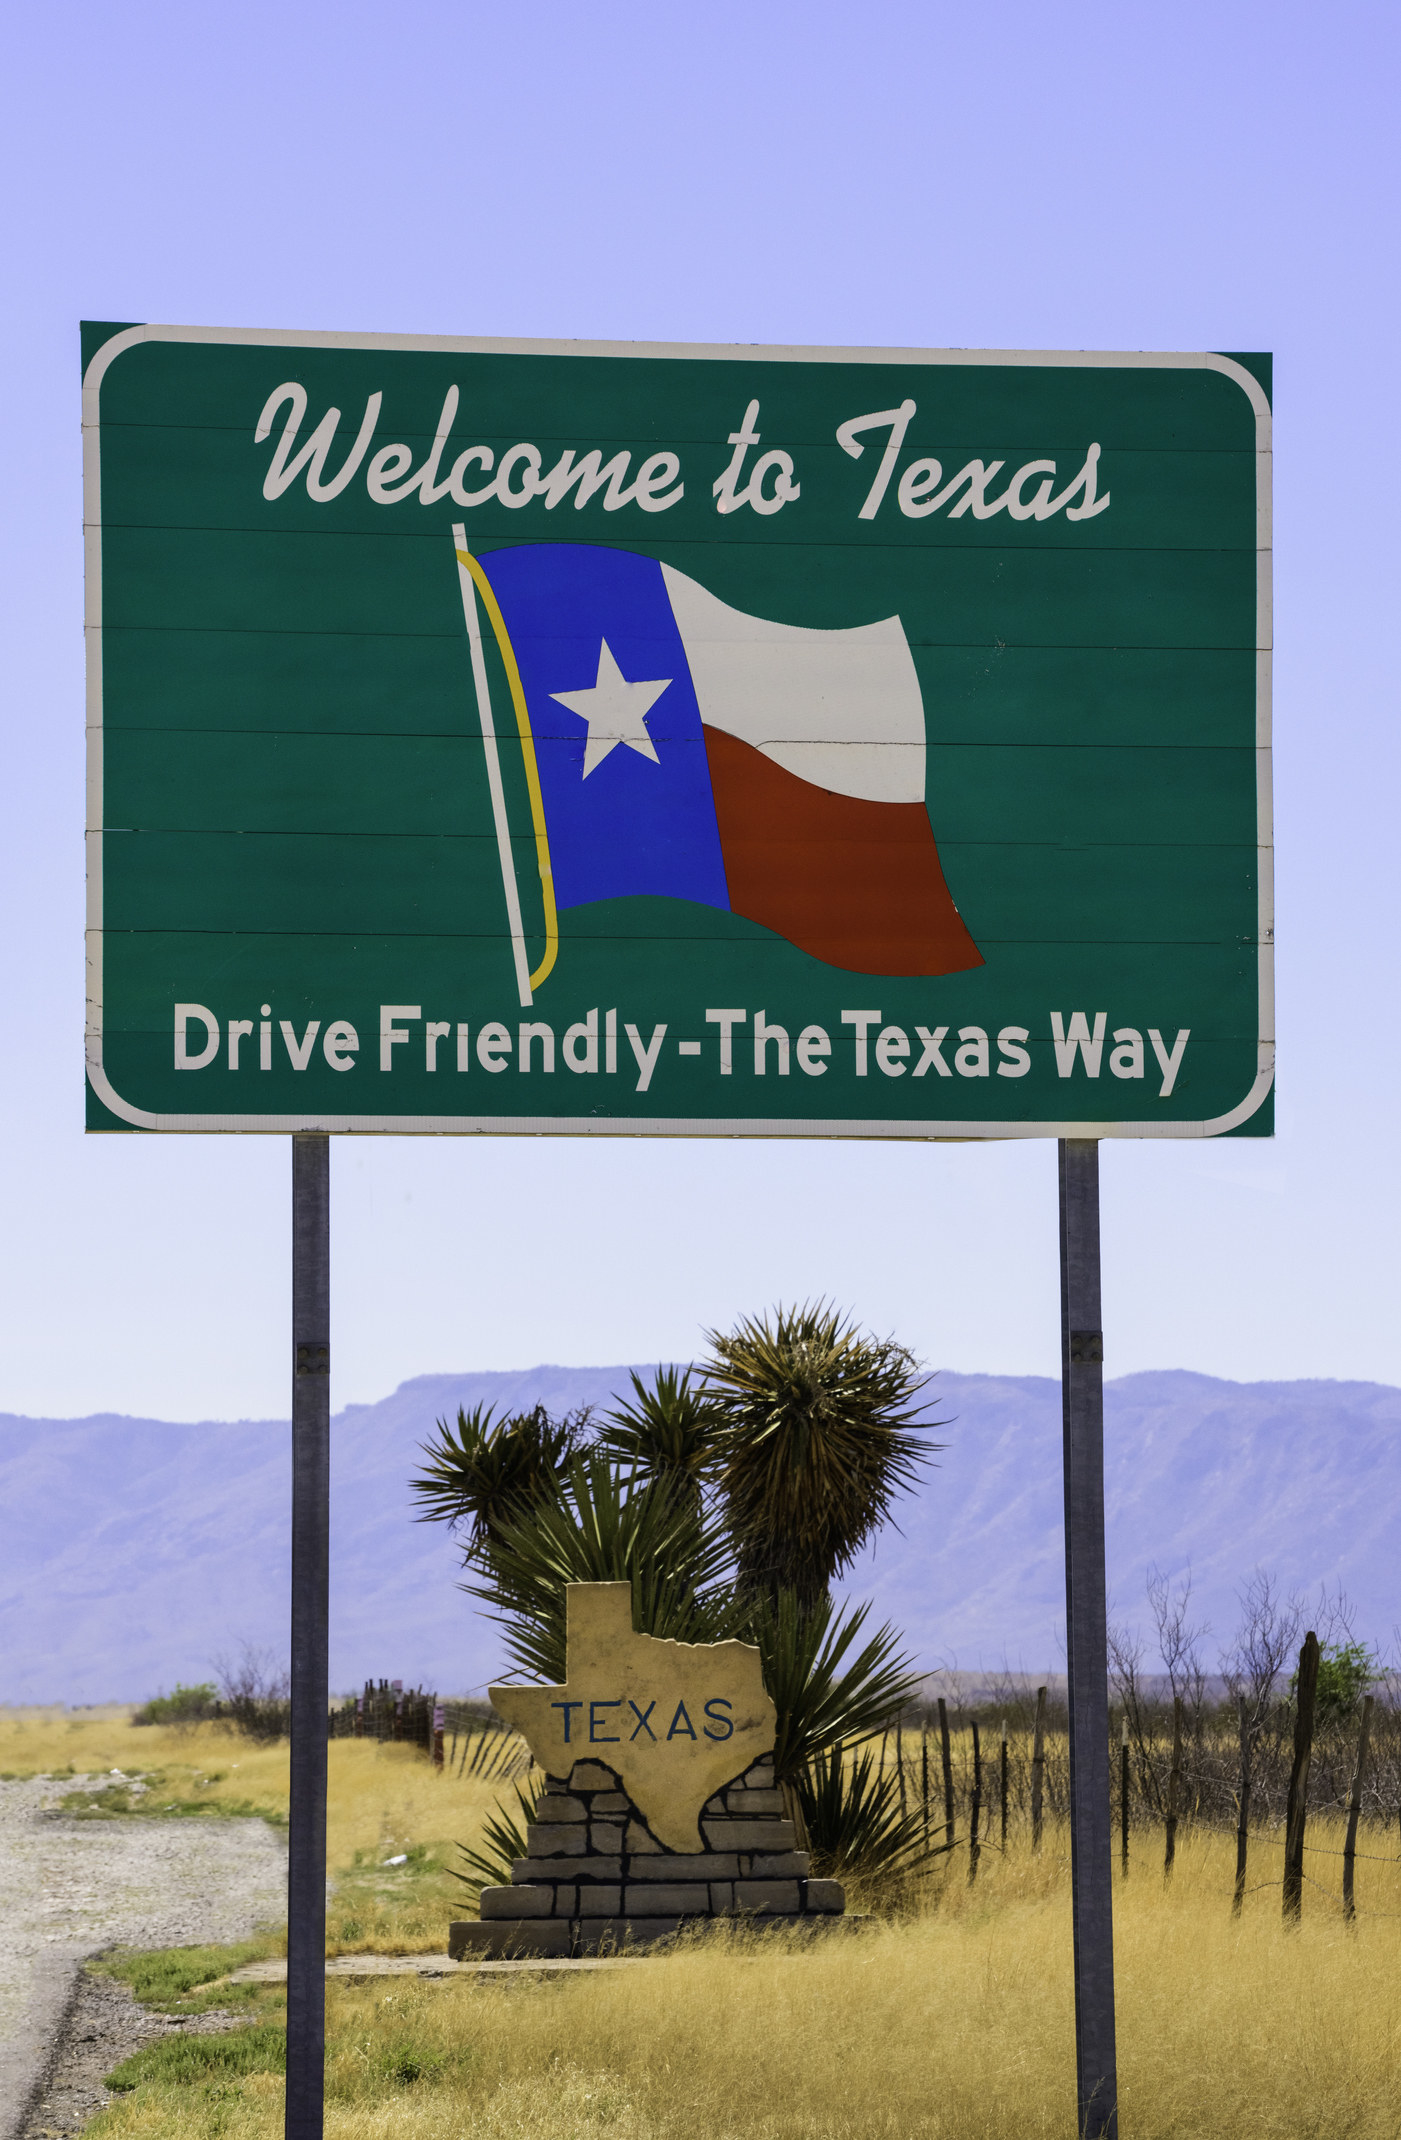 A welcome to Texas sign